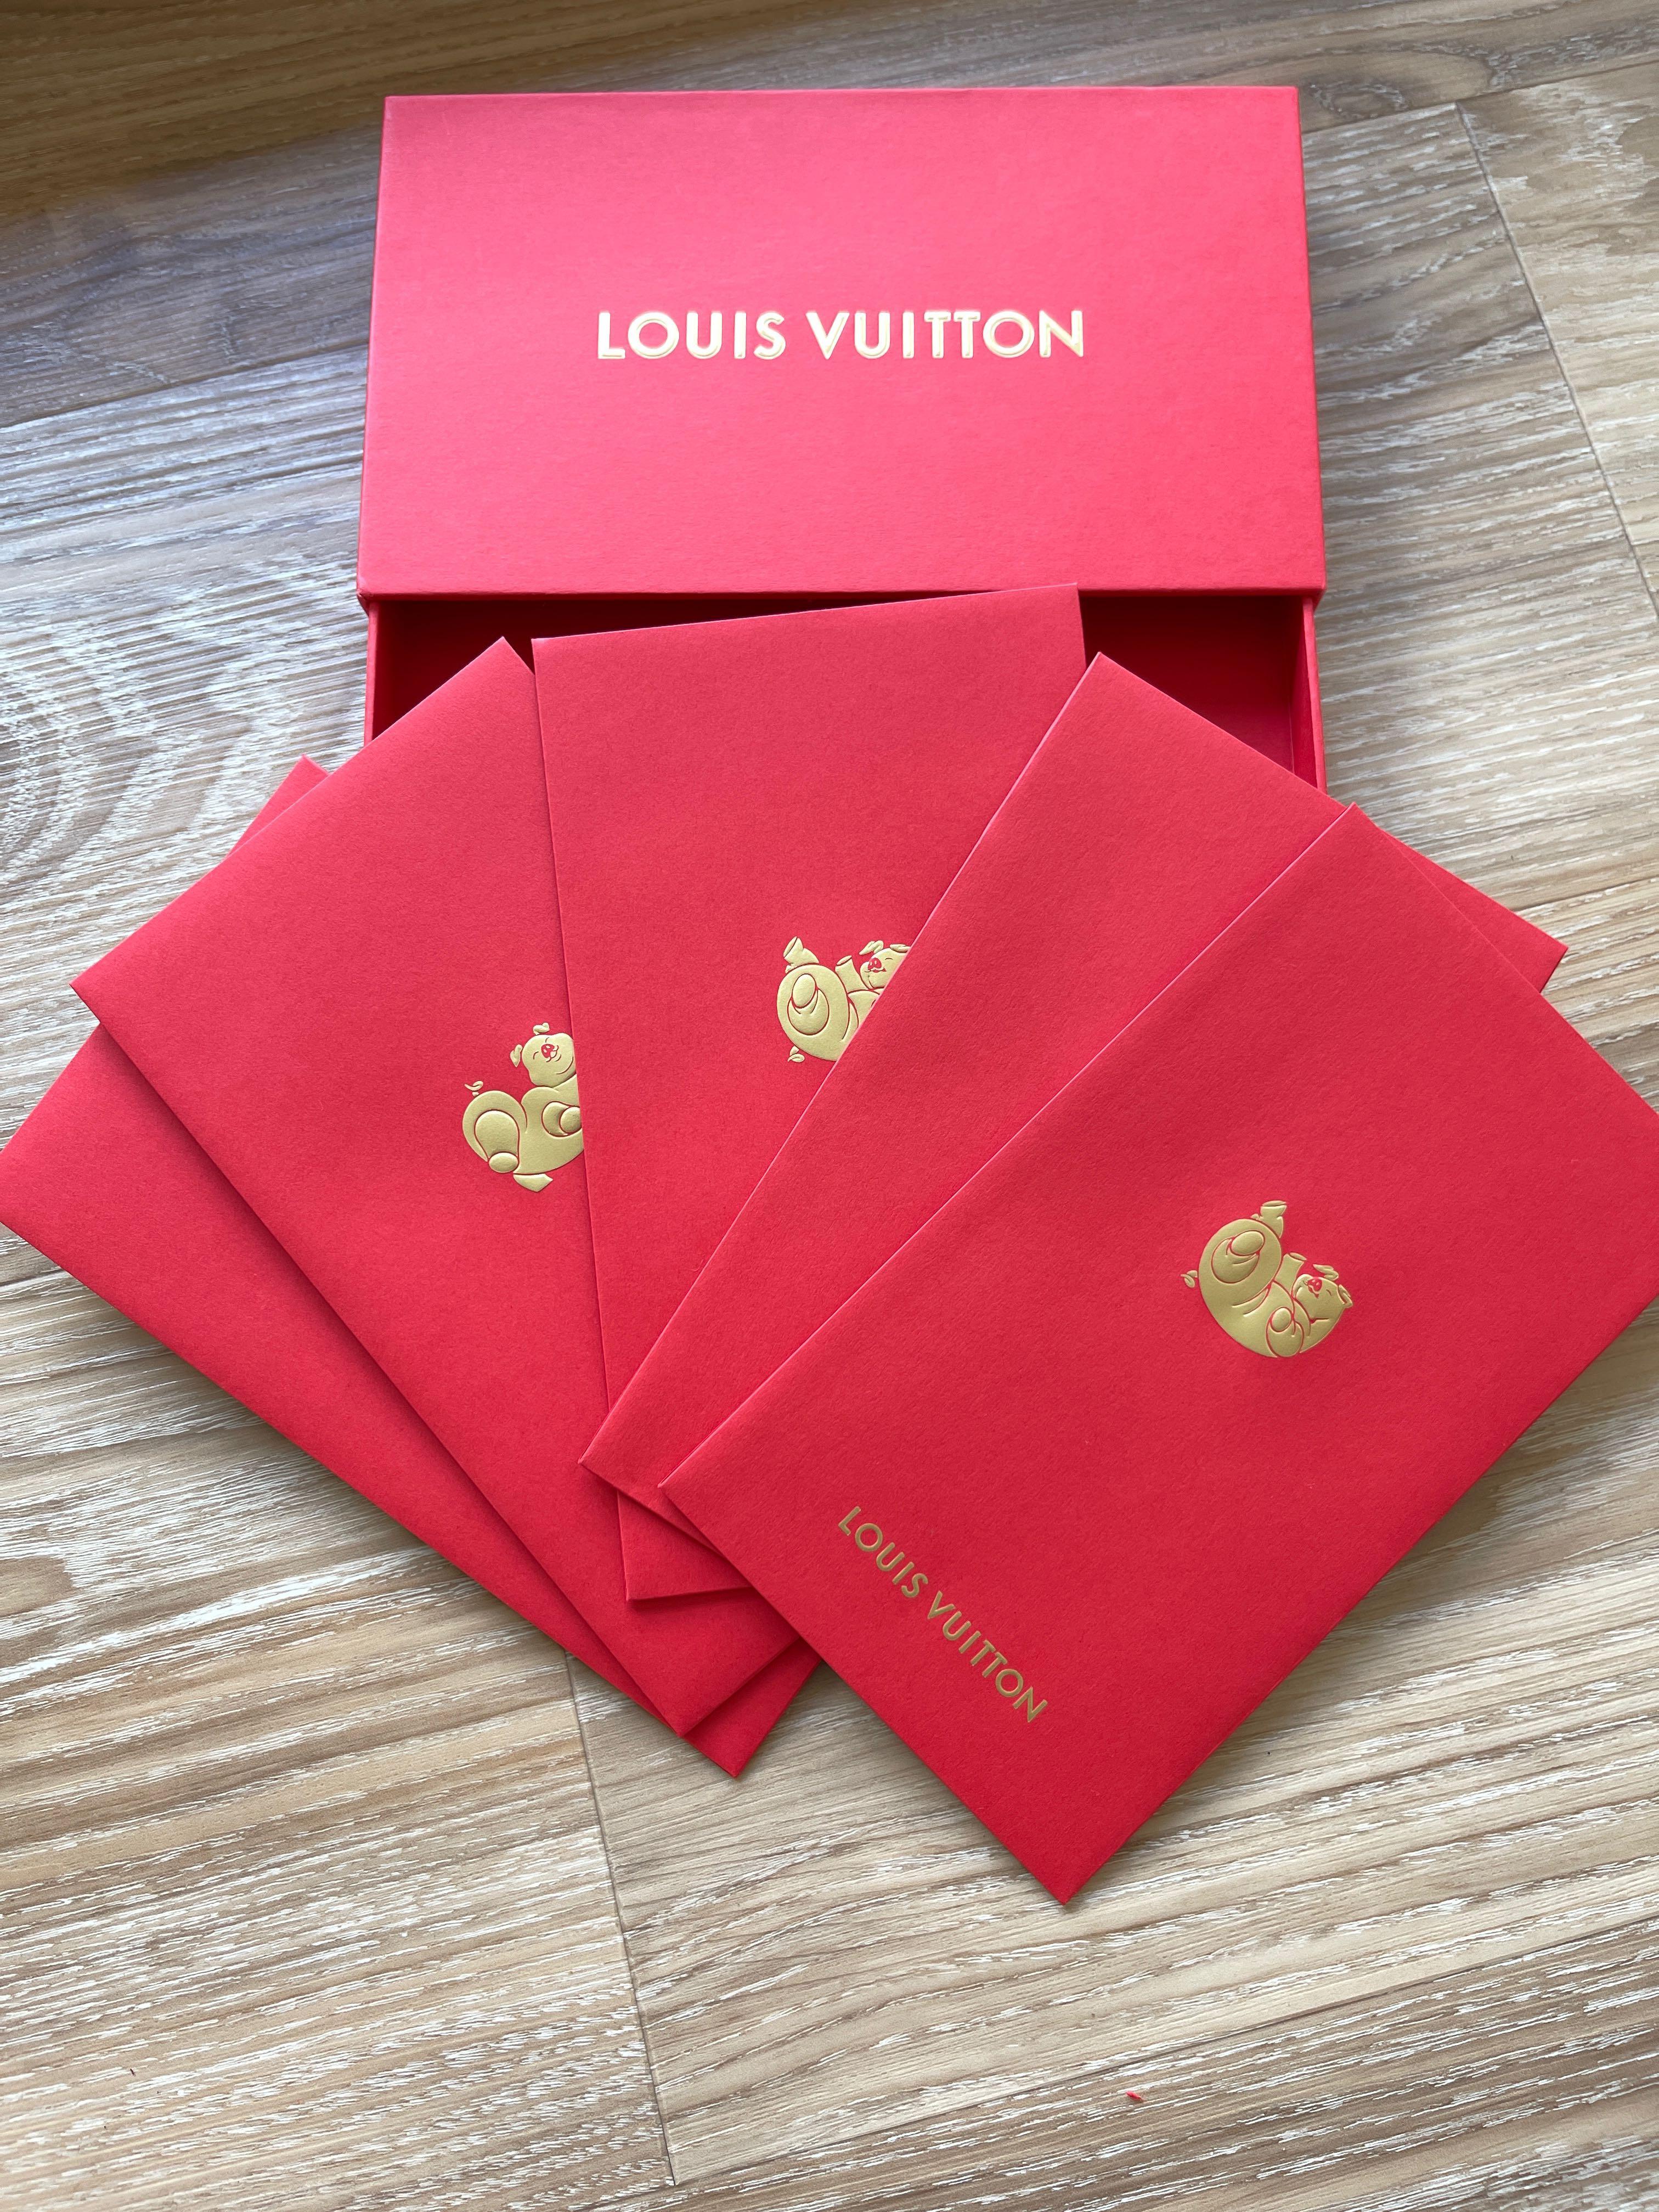 Louis Vuitton red packets, Hobbies & Toys, Stationery & Craft